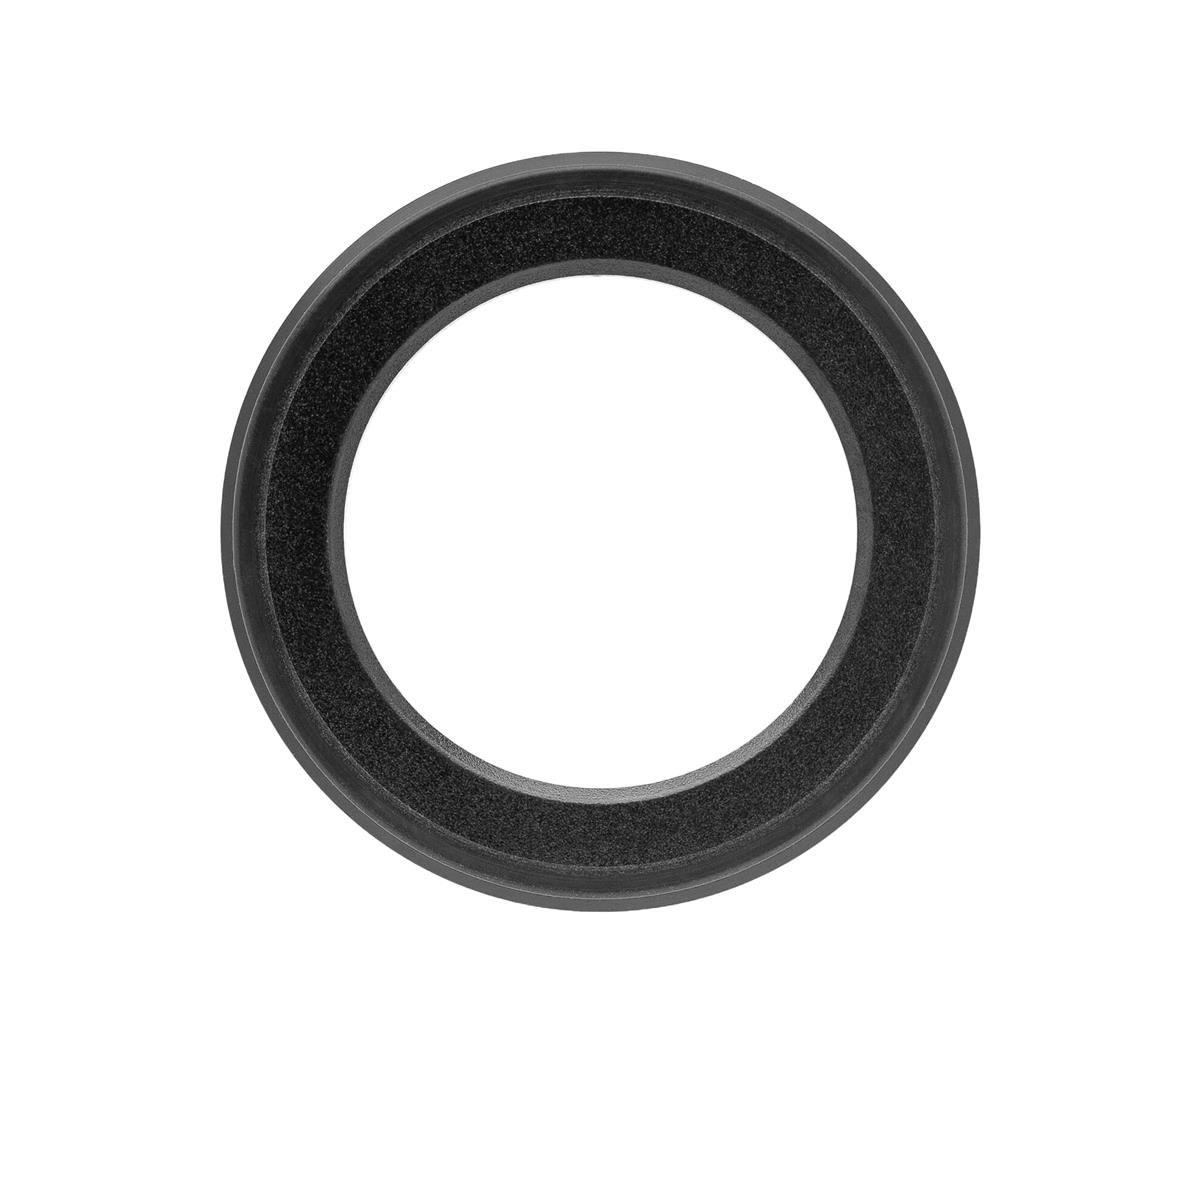 1.8'' headset track for ZS66 and IS60